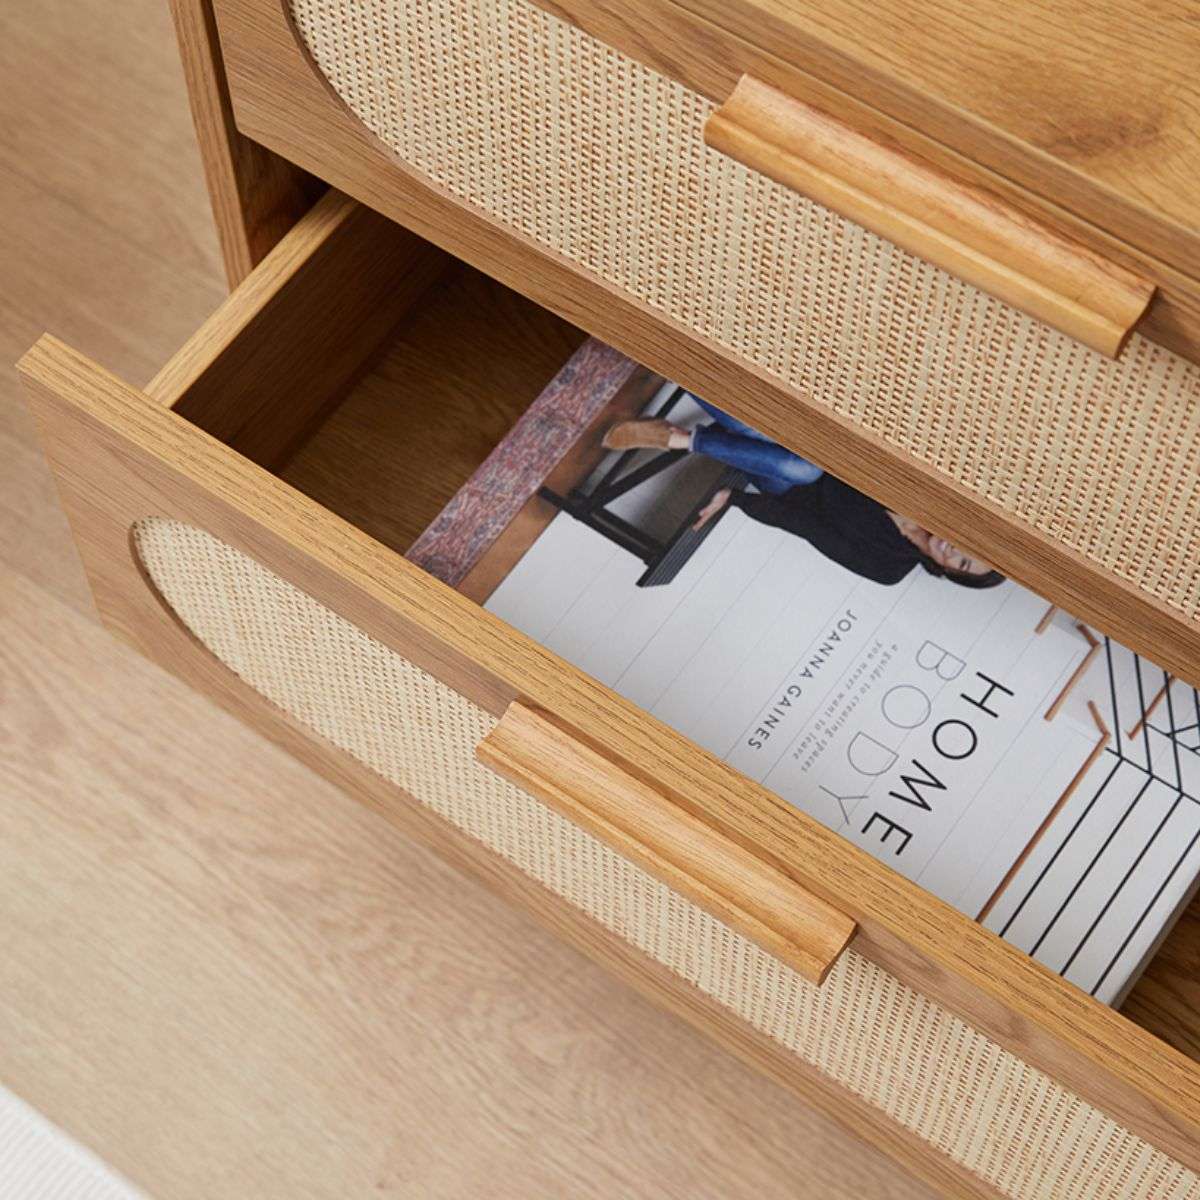 Canyon Two Drawer Bedside Table